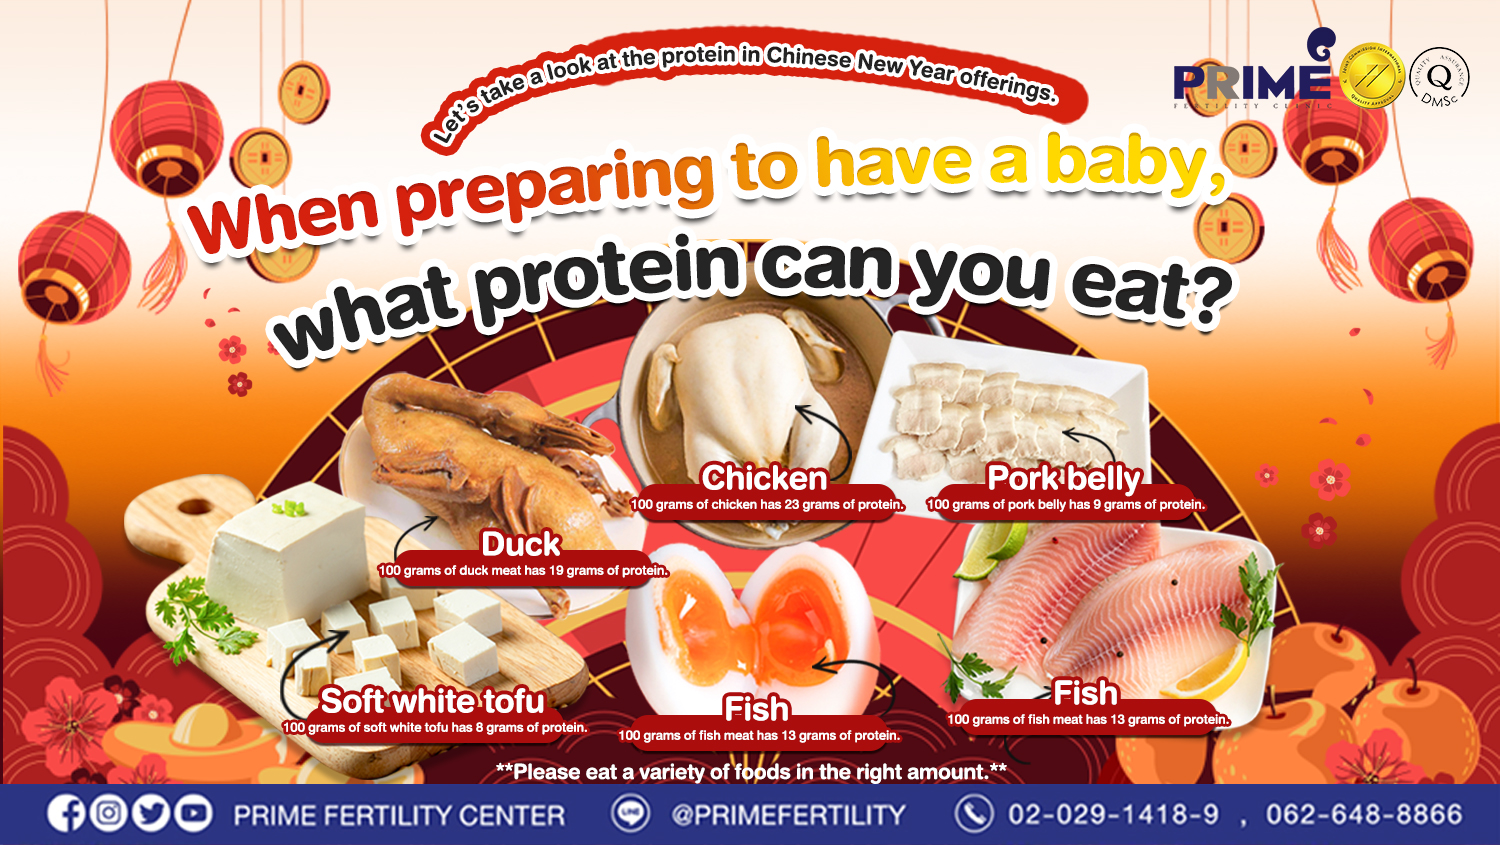 Let’s take a look at the protein in Chinese New Year offerings.
When preparing to have a baby, what protein can you eat?